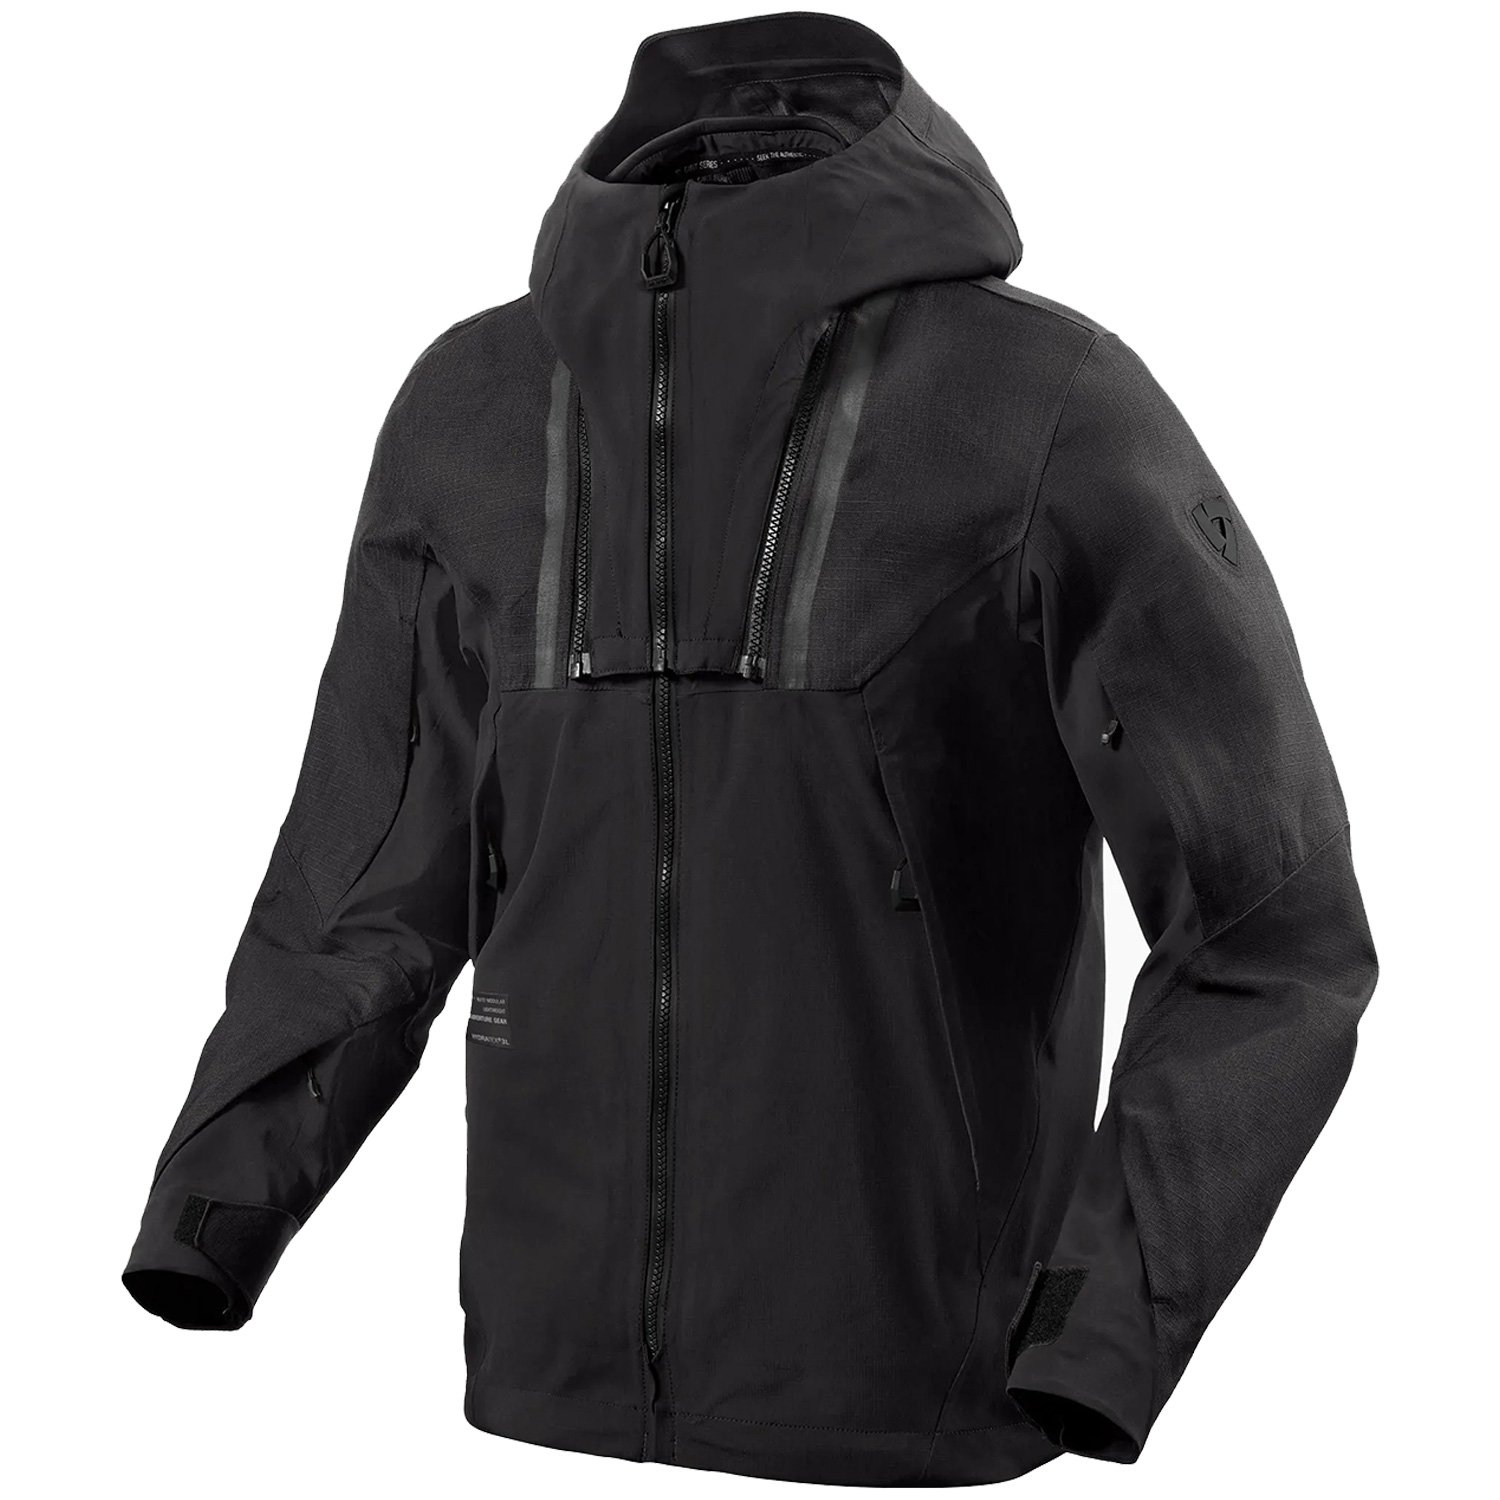 Image of REV'IT! Component 2 H2O Jacket Black Size S ID 8700001370639